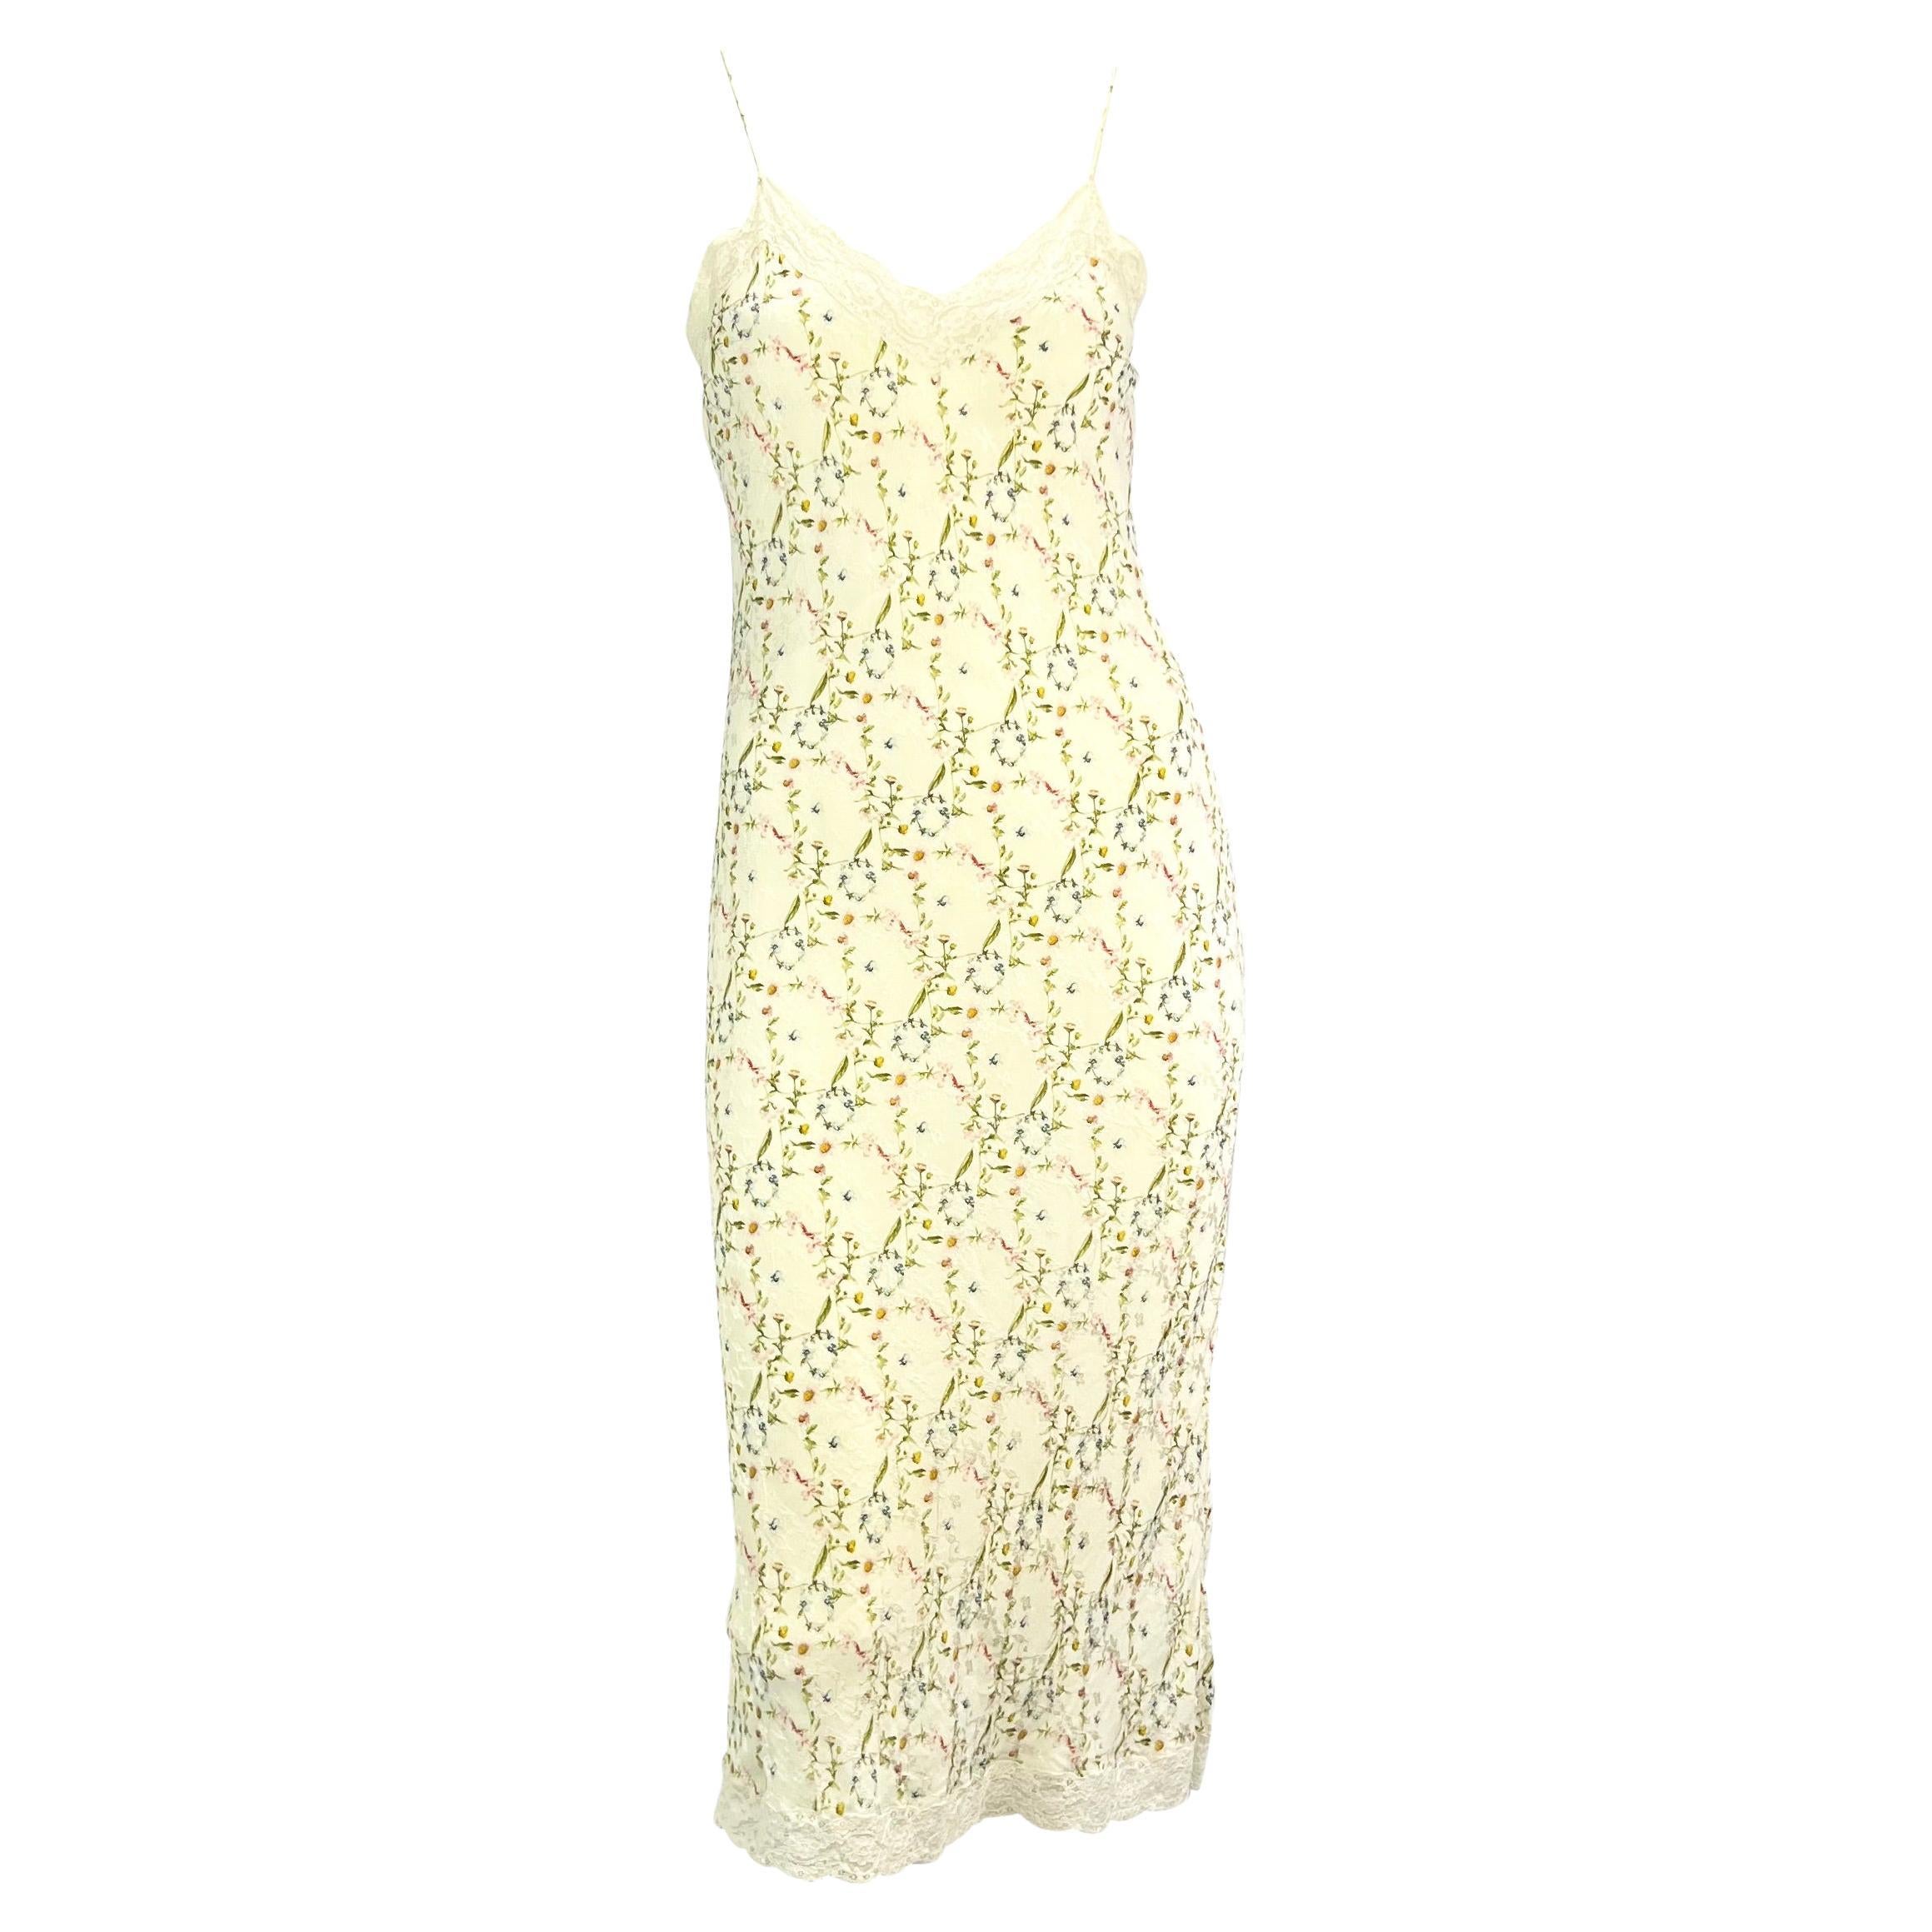 S/S 2005 Christian Dior by John Galliano Floral Diorissimo Lace Slip Dress